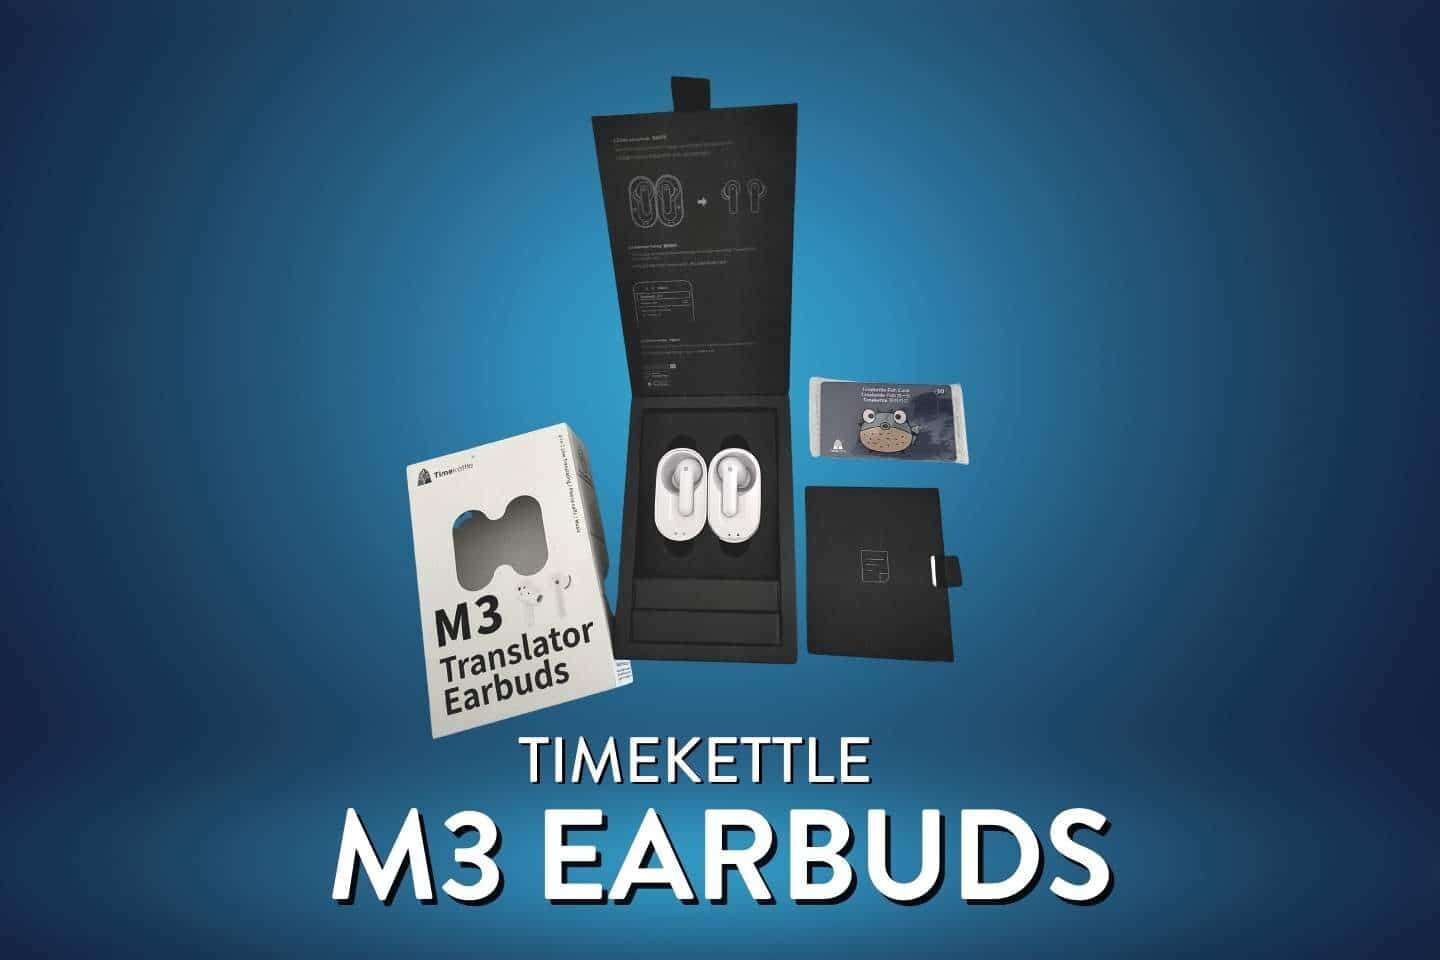 Timekettle M3 Earbuds package inclusion